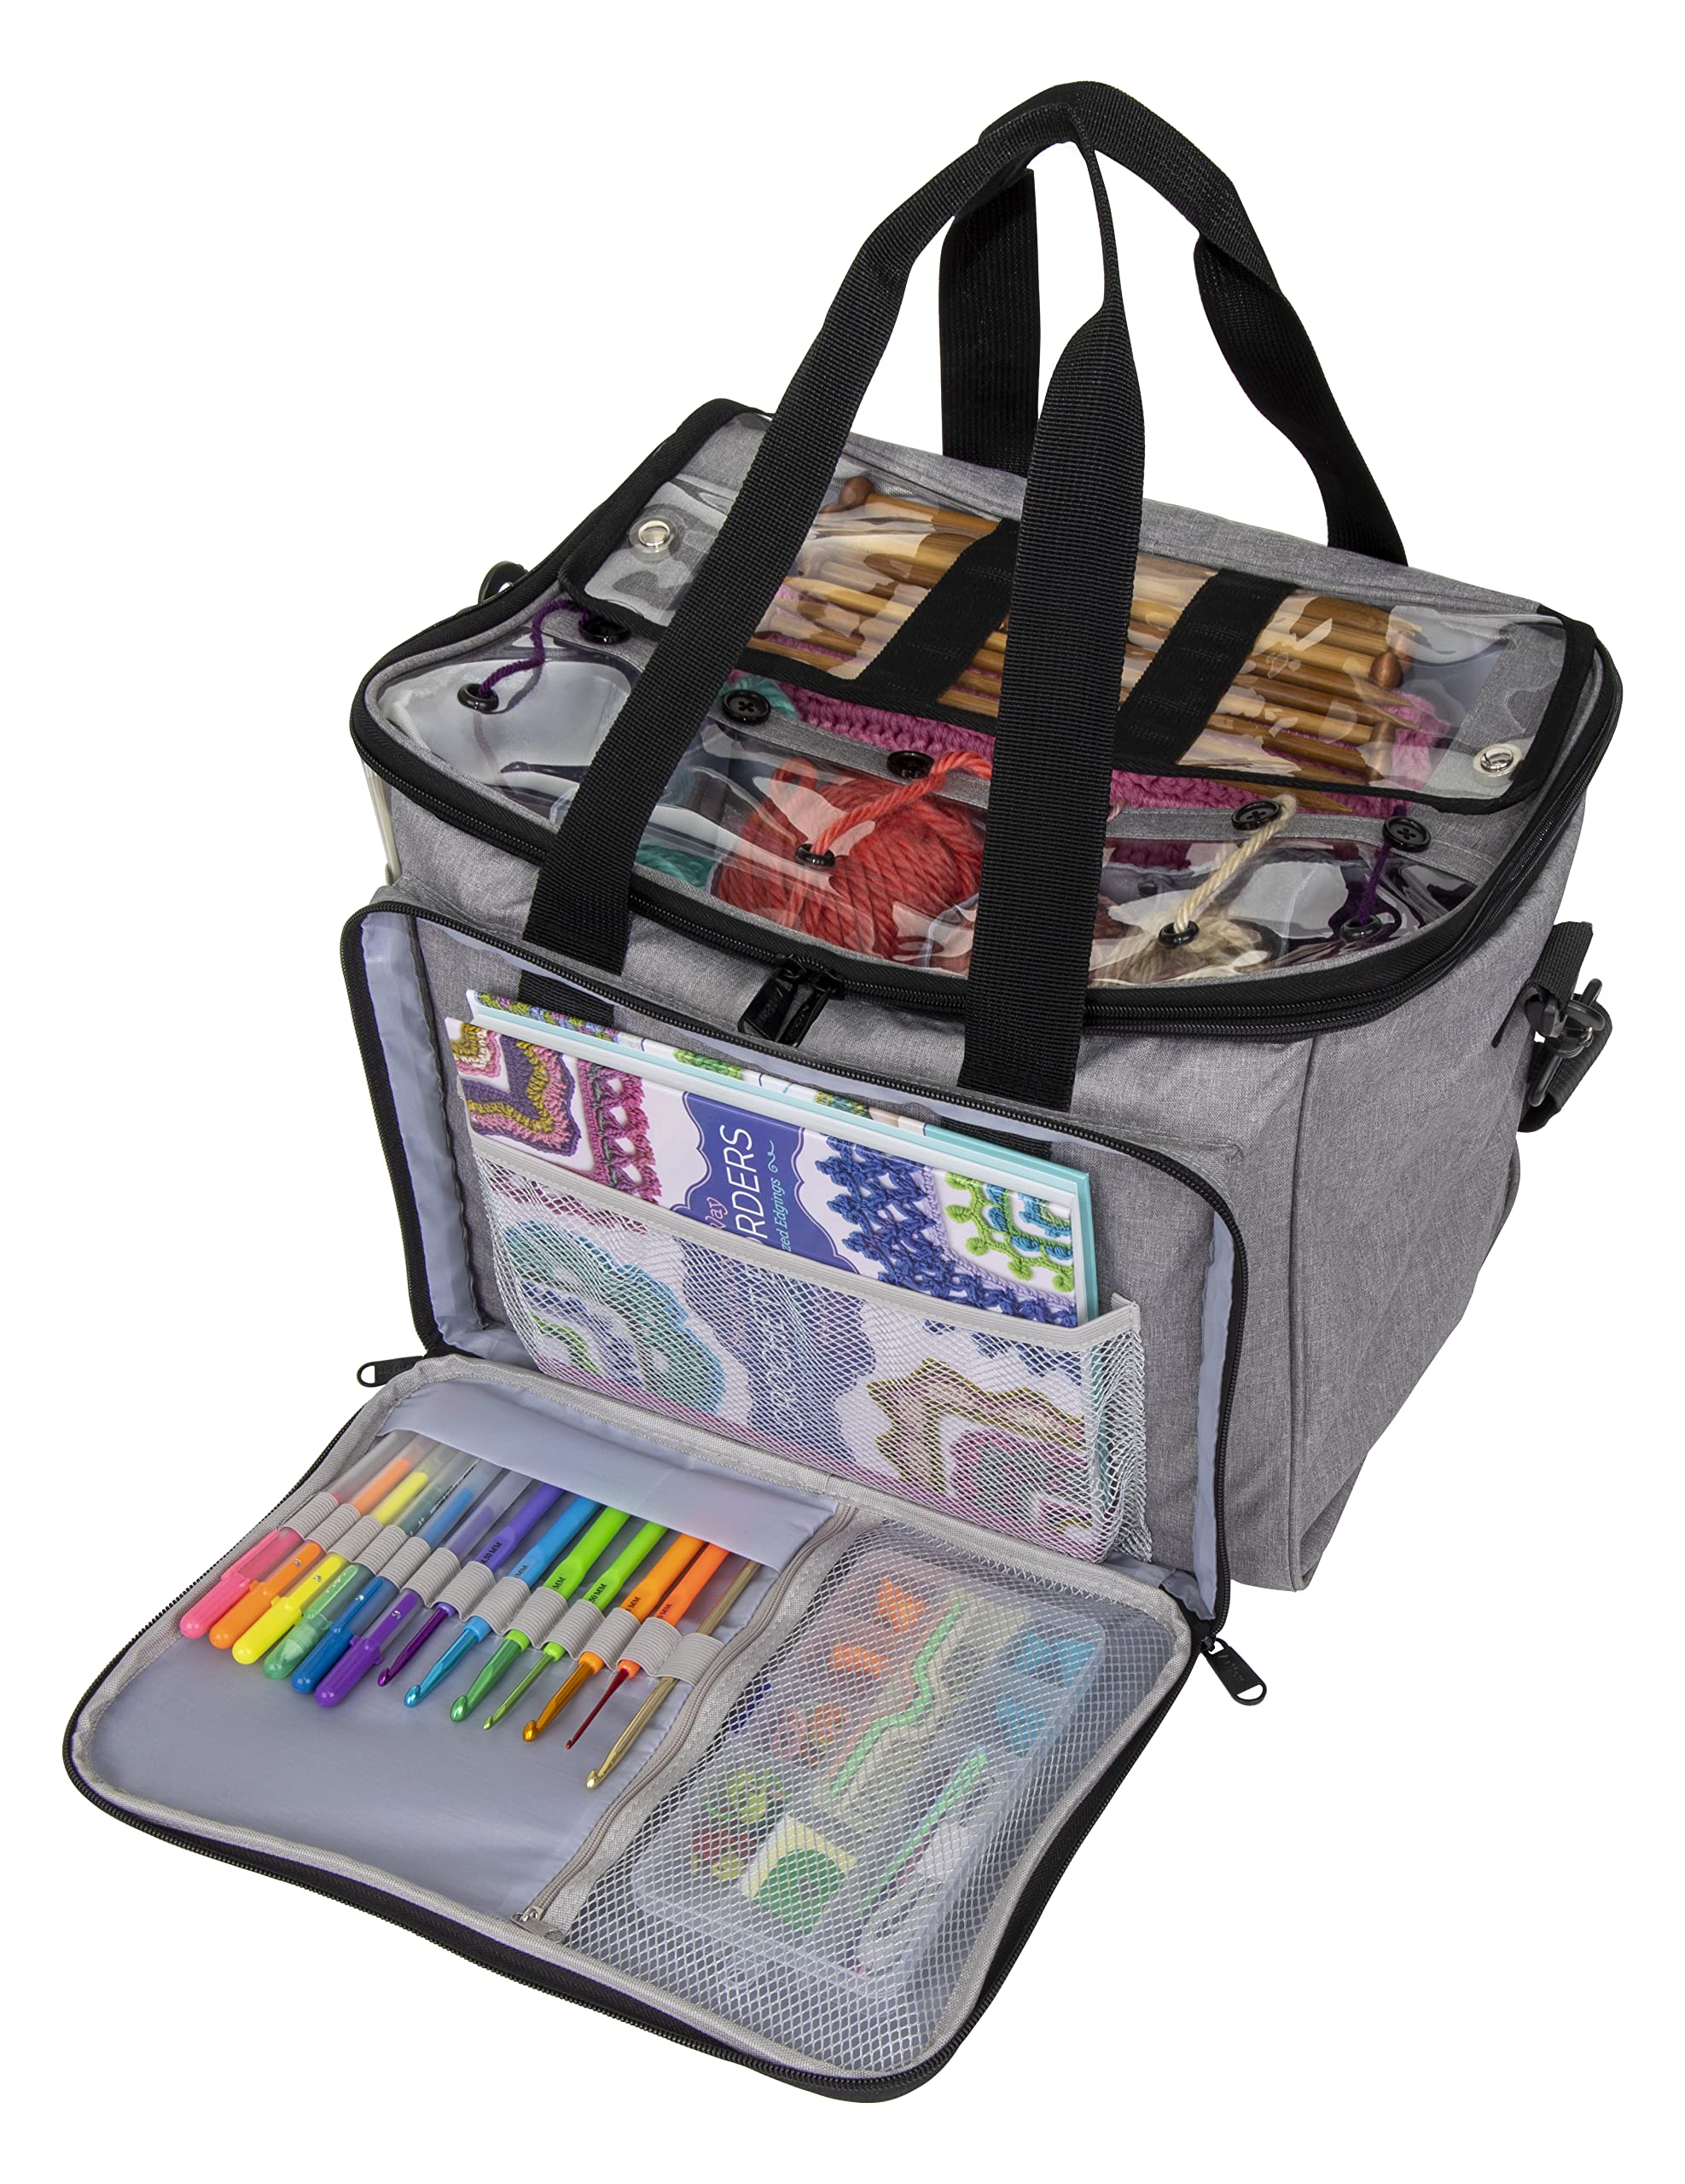 ArtBin 6938AG Needleworks Project Bag, Needleworks Project Bag with Removable Dividers, Split Main Compartment, & Pockets, Yarn & Project Storage, Grey